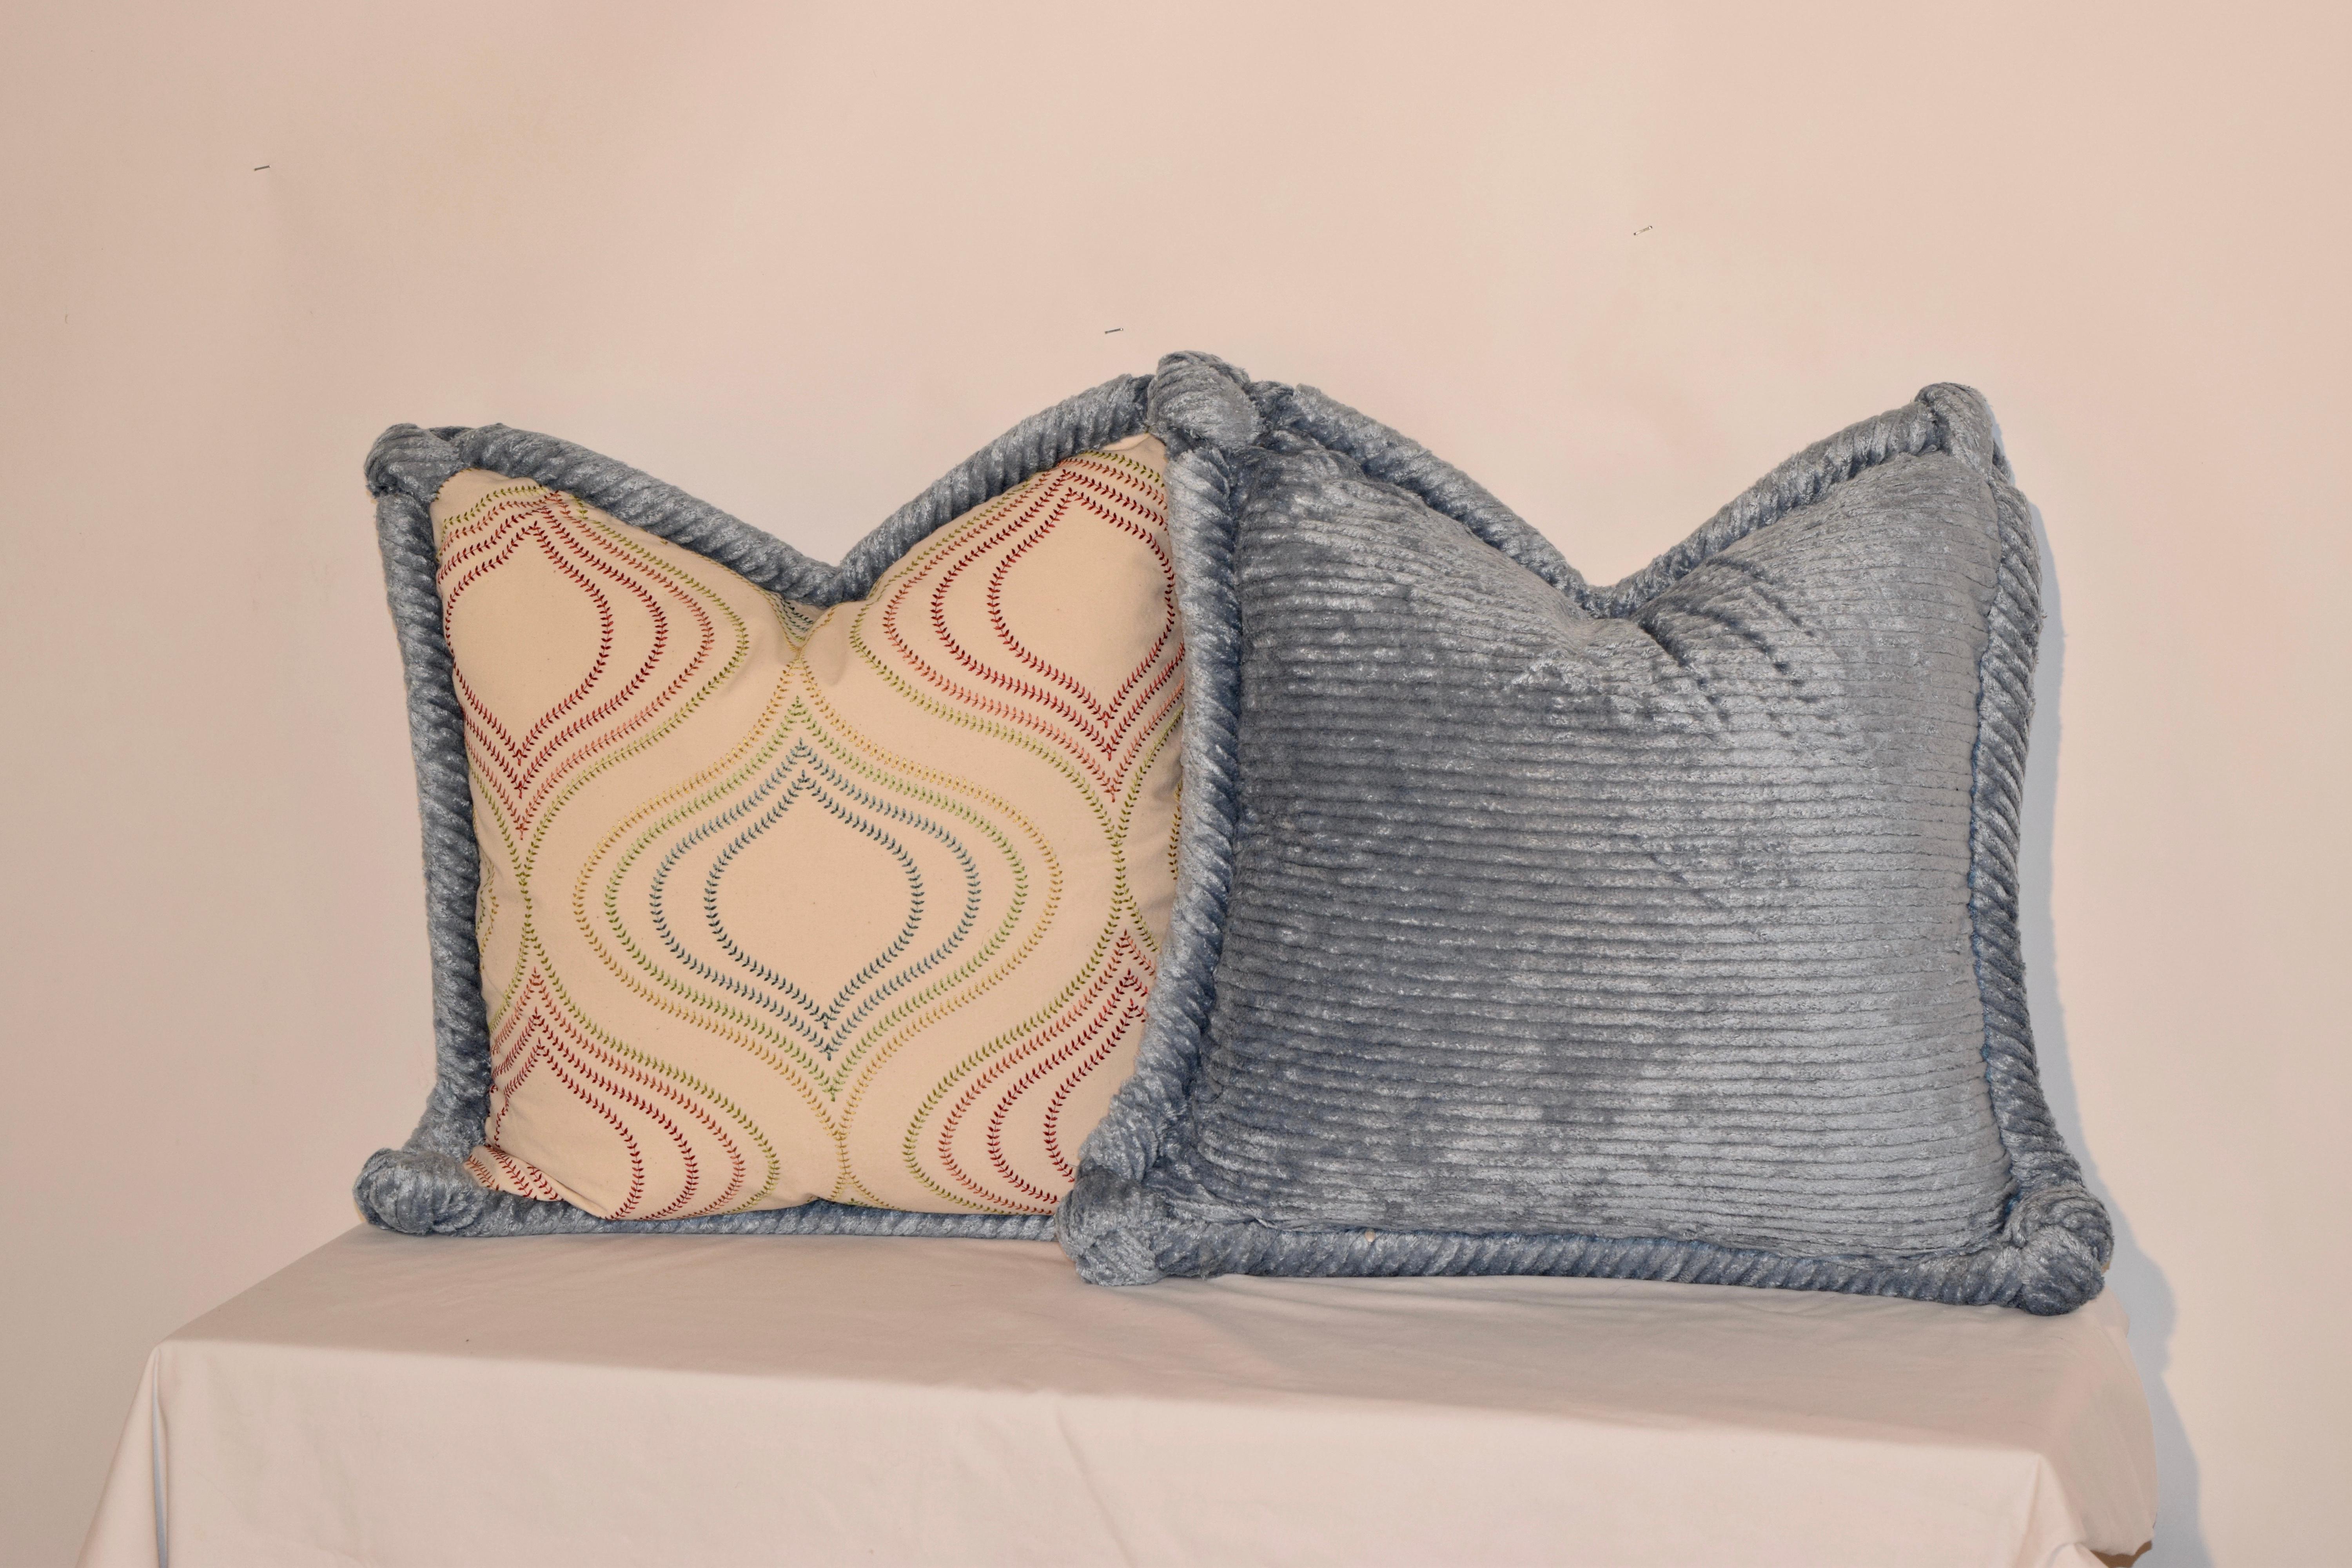 Limited edition design pillows which is handmade in North Carolina. All USA materials. The pillow has an embroidered cotton front panel and a light blue chenille back panel with hand sewn rope welt. Wonderfully designed with hidden zippers and the